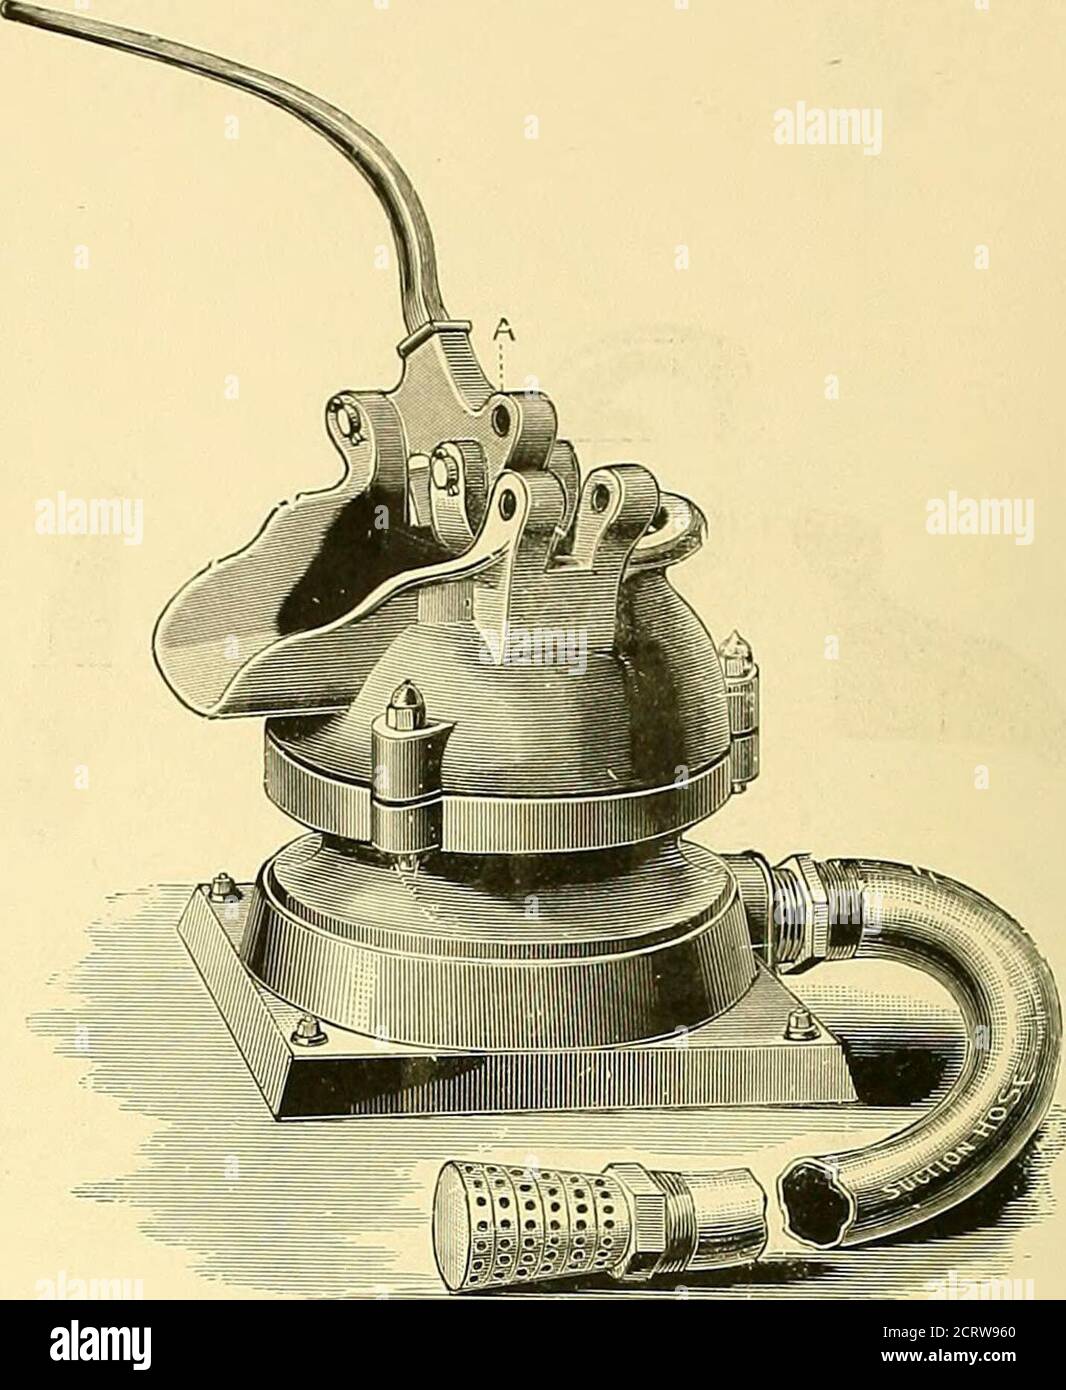 . Illustrated catalogue of James B. Clow & son, manufacturers of and dealers in supplies for plumbers, steam and gas fitters, water and gas works, railroads and contractors .. . FIG. 1710, BOTTOM SUCTION. FIG. 1711. SIDE SUCTION. DIAPHRAGM TRENCH PUMPS. -Figs. 1710 and 1711. NUMBER....       .       ... ........ 1 2 , SIZE OF SUCTION   . INCHES 2+ 122.00 3 U24.0030.00 CAPACITY GALLONS PER STROKE FIG. 1710 . - EACH FIG. 1711 ...    .-.-. -- EACH — - - — Price, 12 feet of 3-inch Spiral Flat-wired Suction Hose (sj)ecially made for this purpose), fitted with Brass Strainer, Hose,Nipple, and Coupli Stock Photo